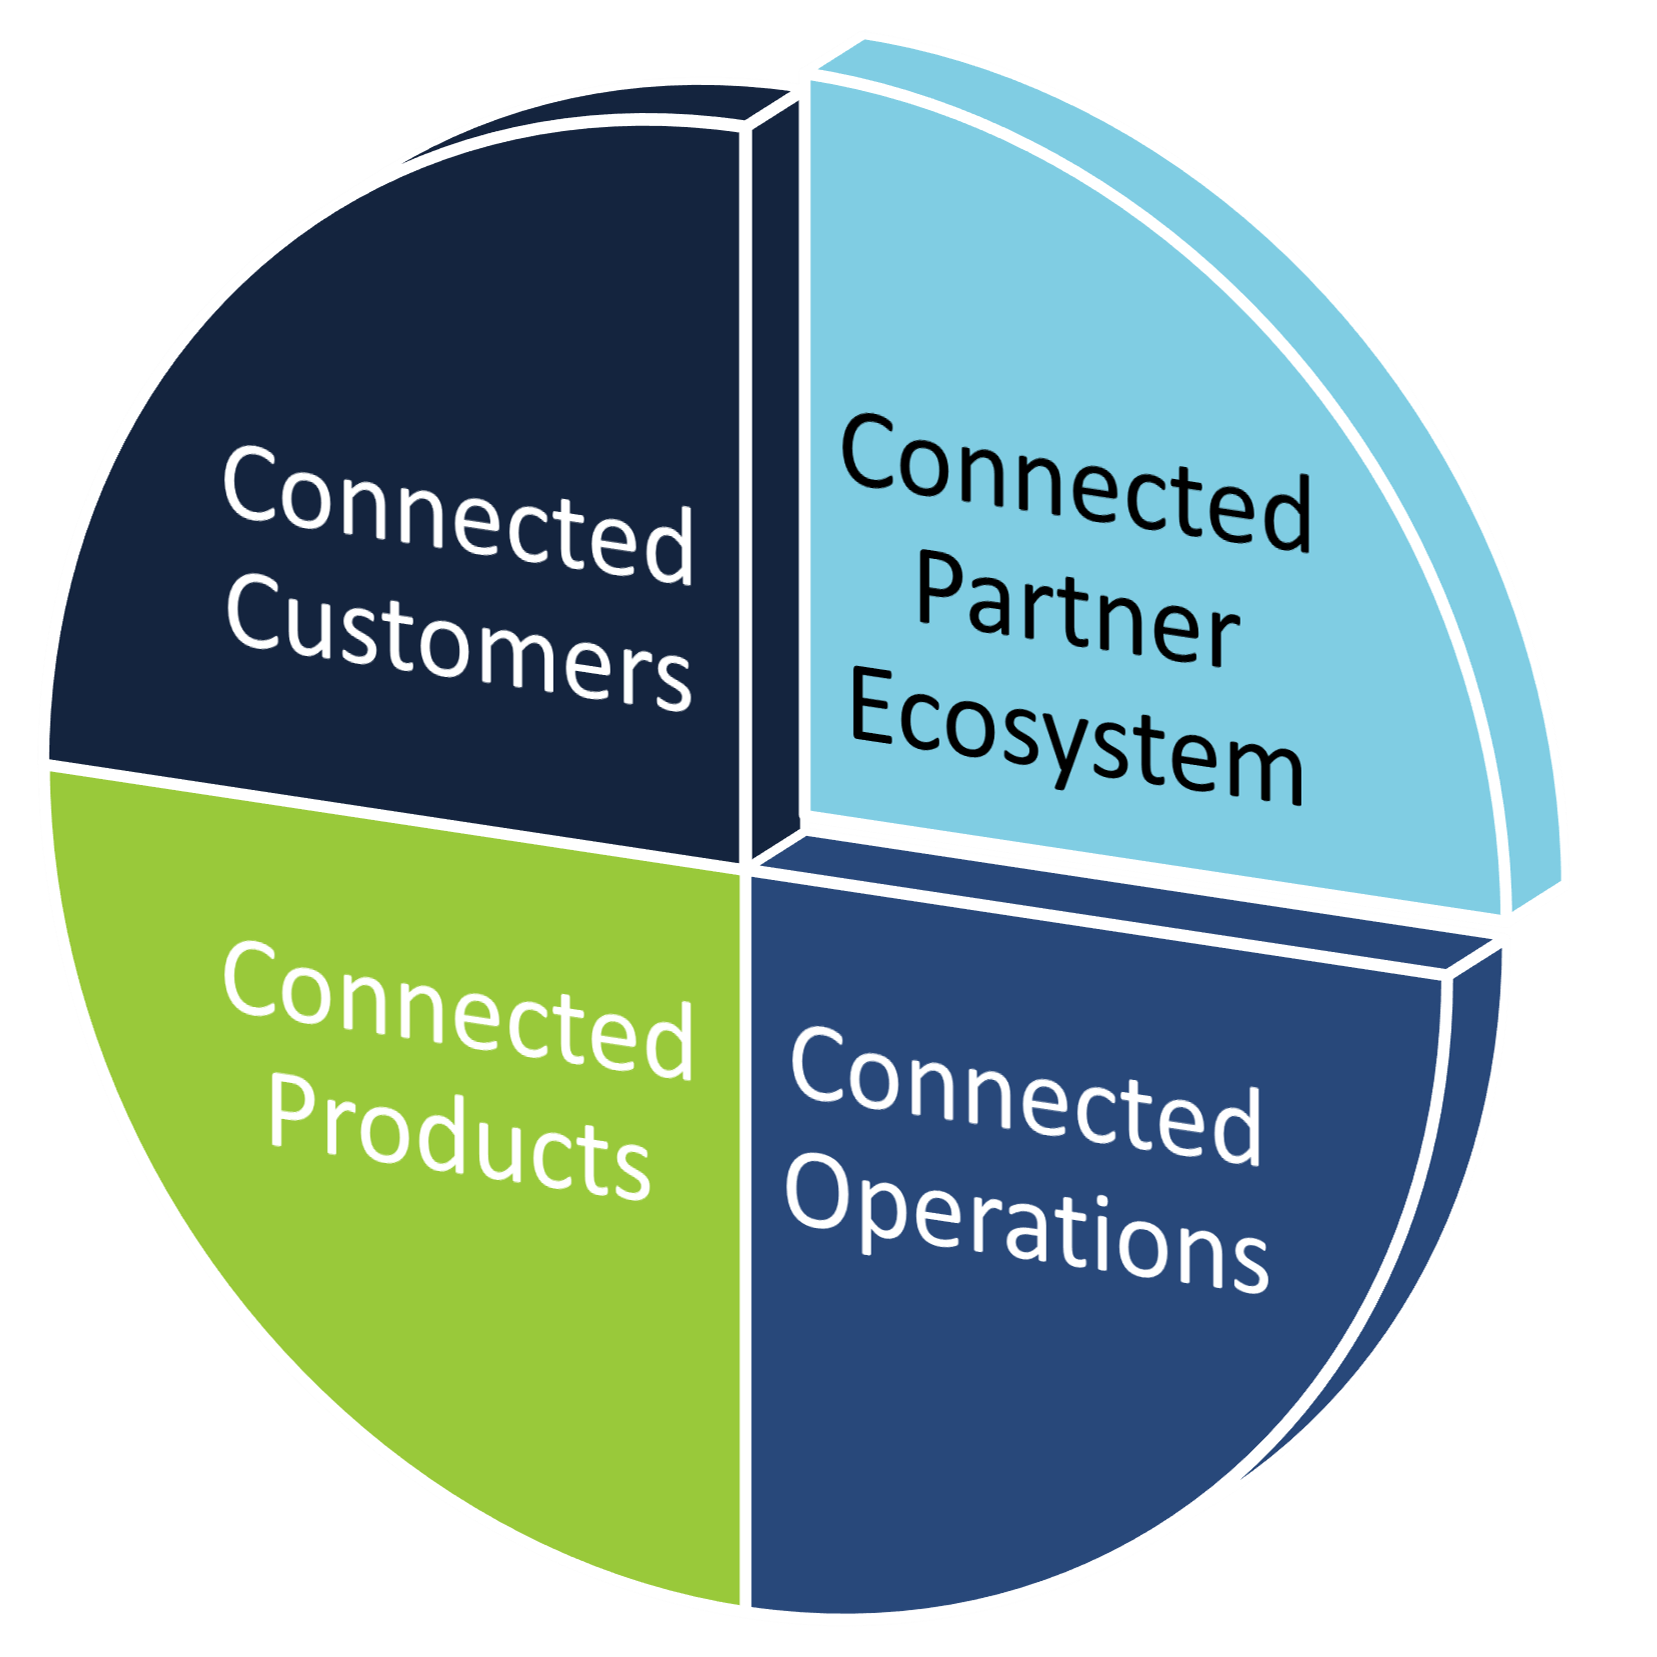 connected products, partner ecosystem, operations and customers